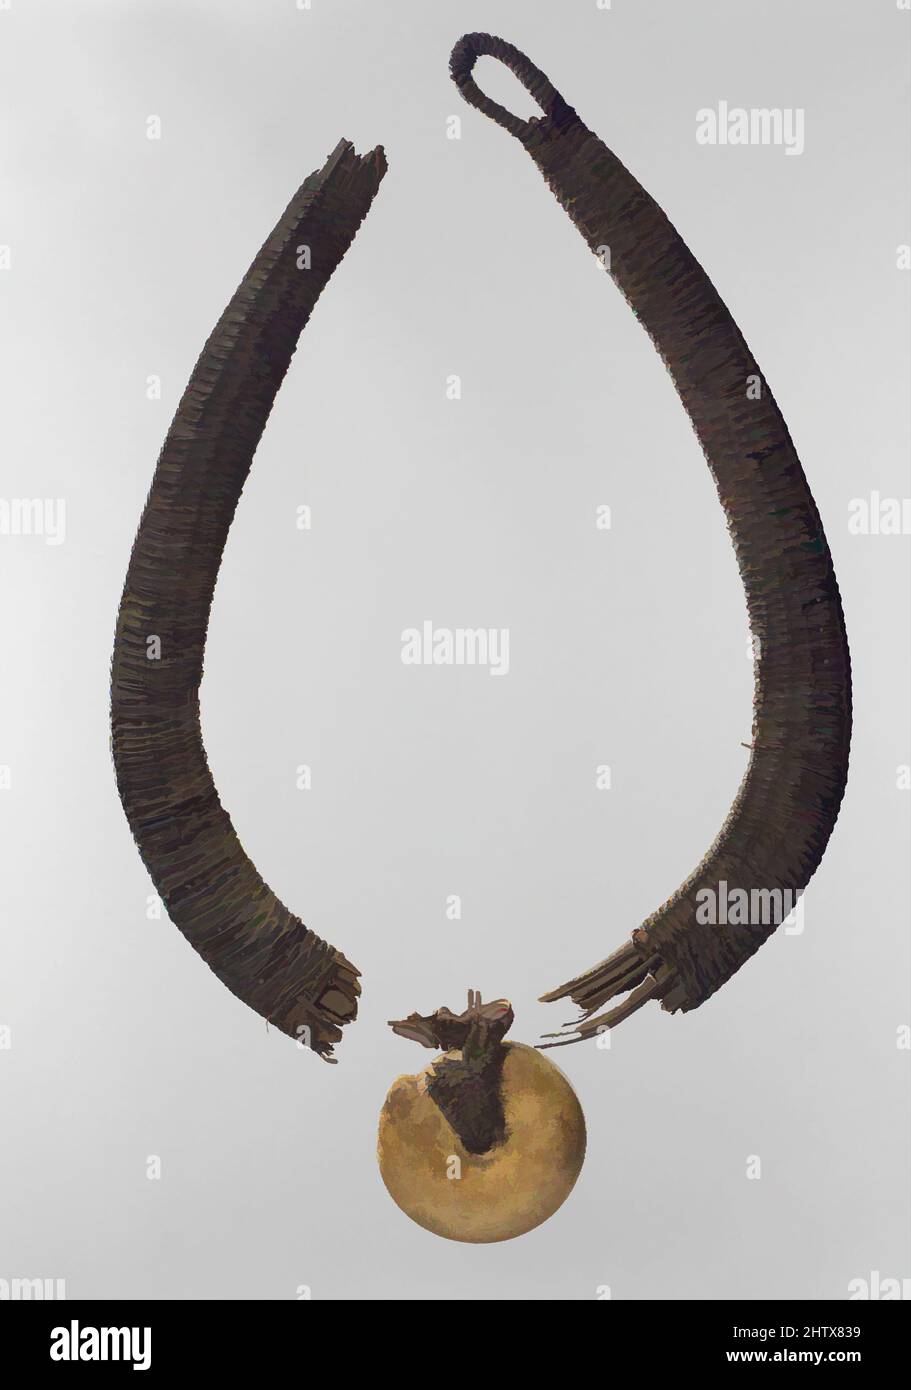 Art inspired by Necklace: Pendant, 16th–18th century, Angola, Chokwe peoples, Wood, ceramic, raffia, H x W: 11 x 14 3/4in. (27.9 x 37.5cm), Wood-Ornaments, The broad expanse of open savanna in present-day Democratic Republic of Congo and Angola became a major center of trade between, Classic works modernized by Artotop with a splash of modernity. Shapes, color and value, eye-catching visual impact on art. Emotions through freedom of artworks in a contemporary way. A timeless message pursuing a wildly creative new direction. Artists turning to the digital medium and creating the Artotop NFT Stock Photo